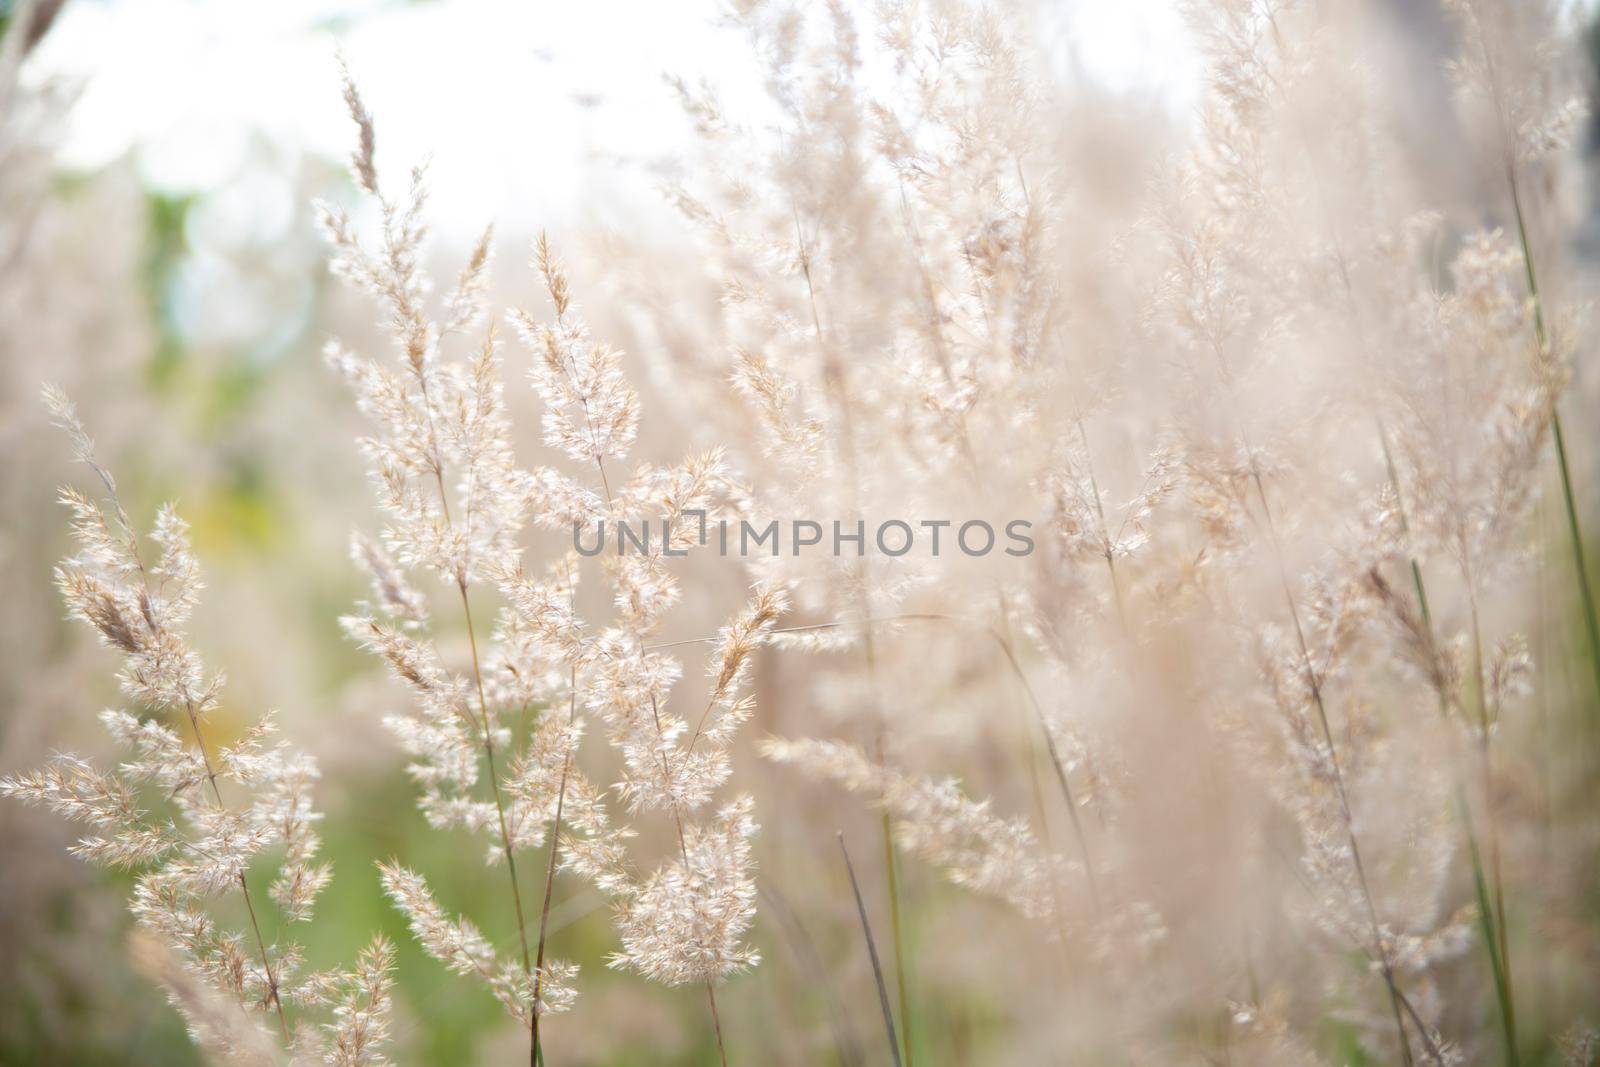 Pampas grass in the sky, Abstract natural background of soft plants Cortaderia selloana moving in the wind. Bright and clear scene of plants similar to feather dusters. by Mariaprovector